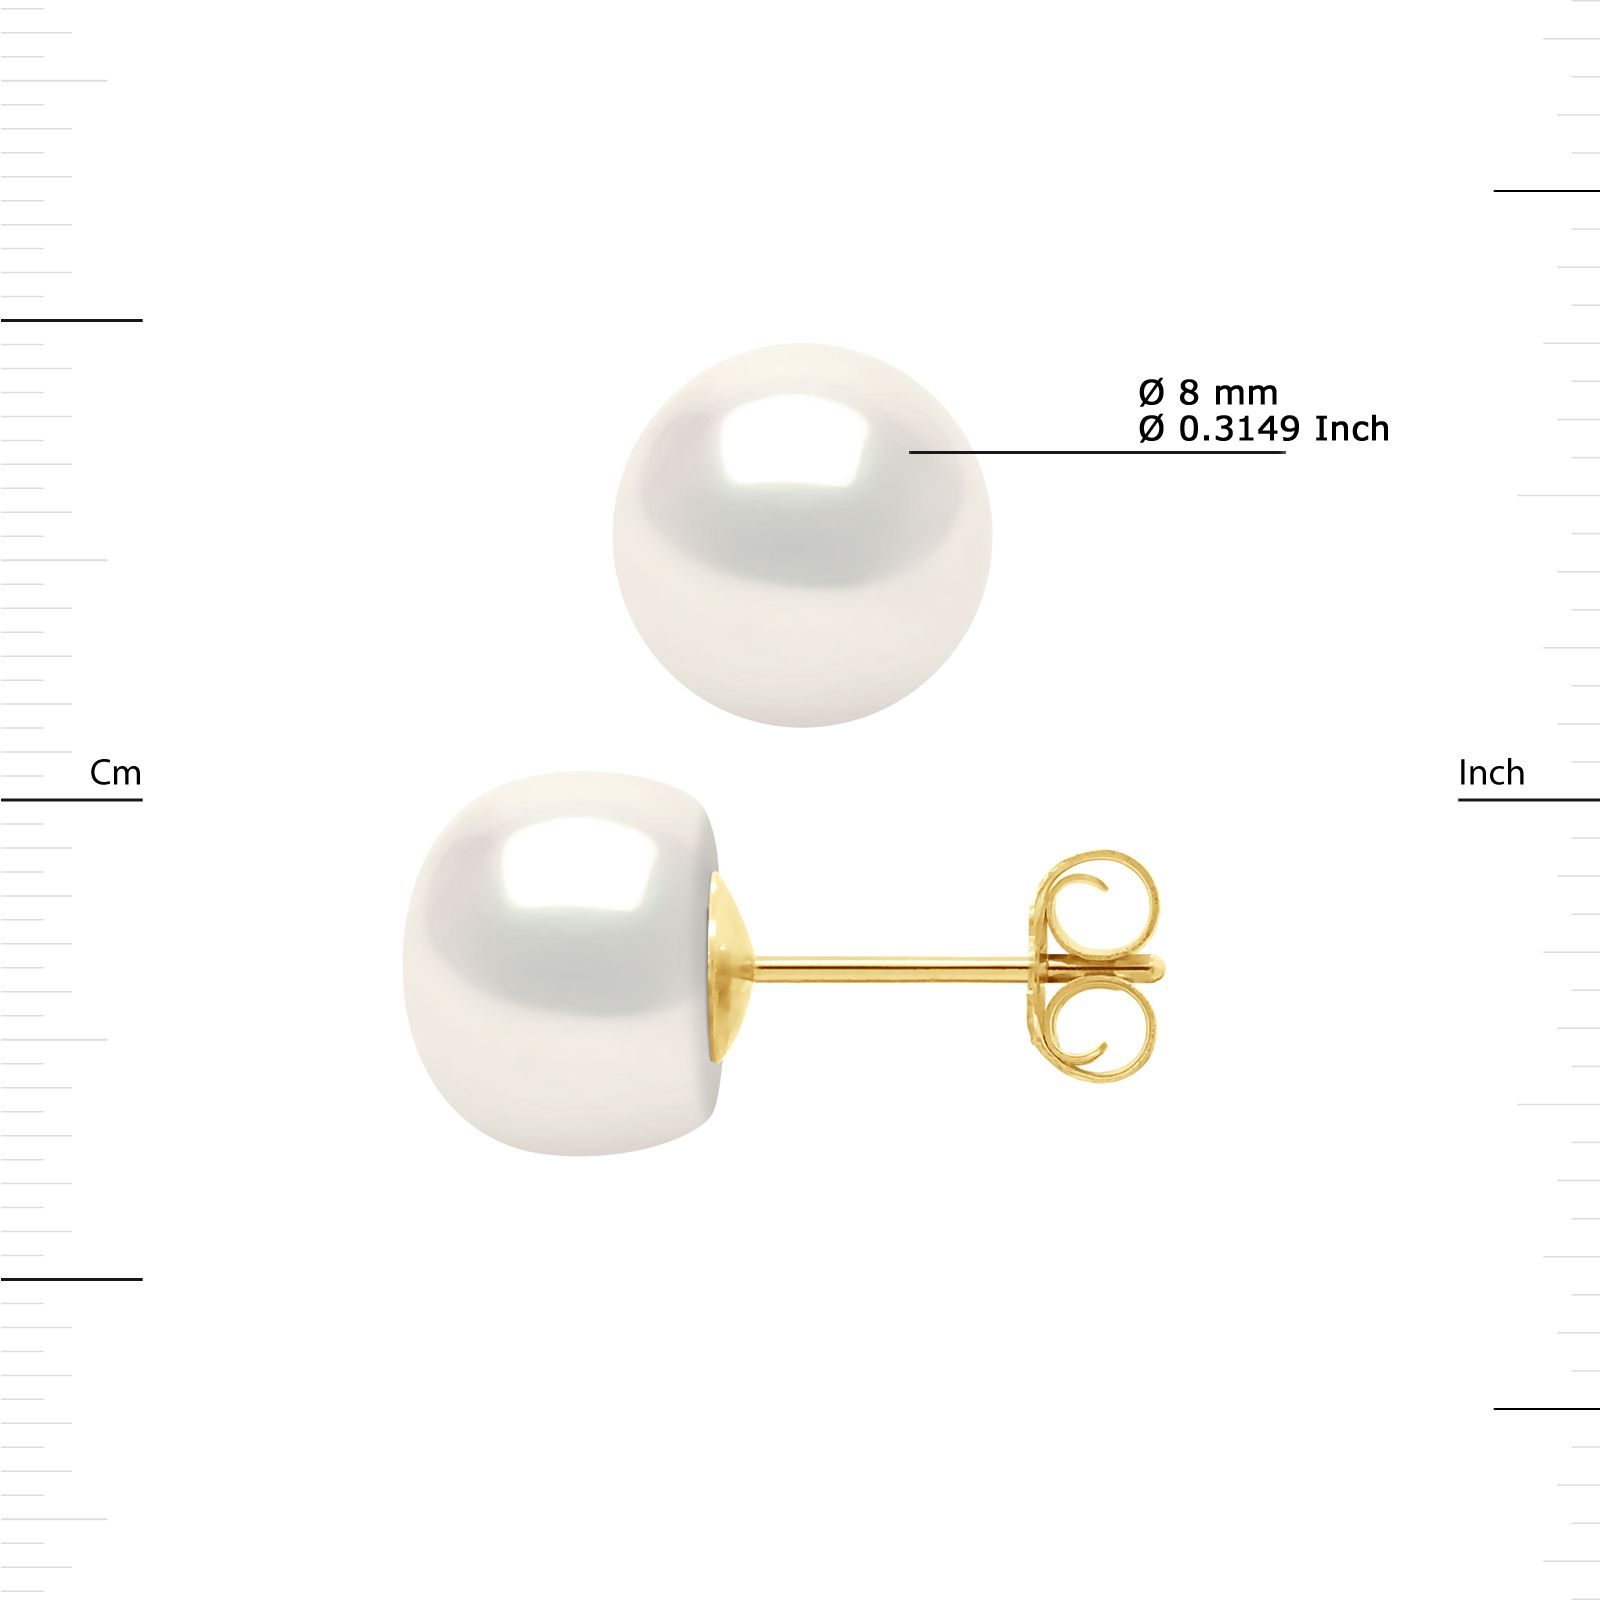 Earrings of Gold 375 and true Cultured Freshwater Pearls Button 8-9 mm , 0,31 in - Natural White Color Push System - Our jewellery is made in France and will be delivered in a gift box accompanied by a Certificate of Authenticity and International Warranty